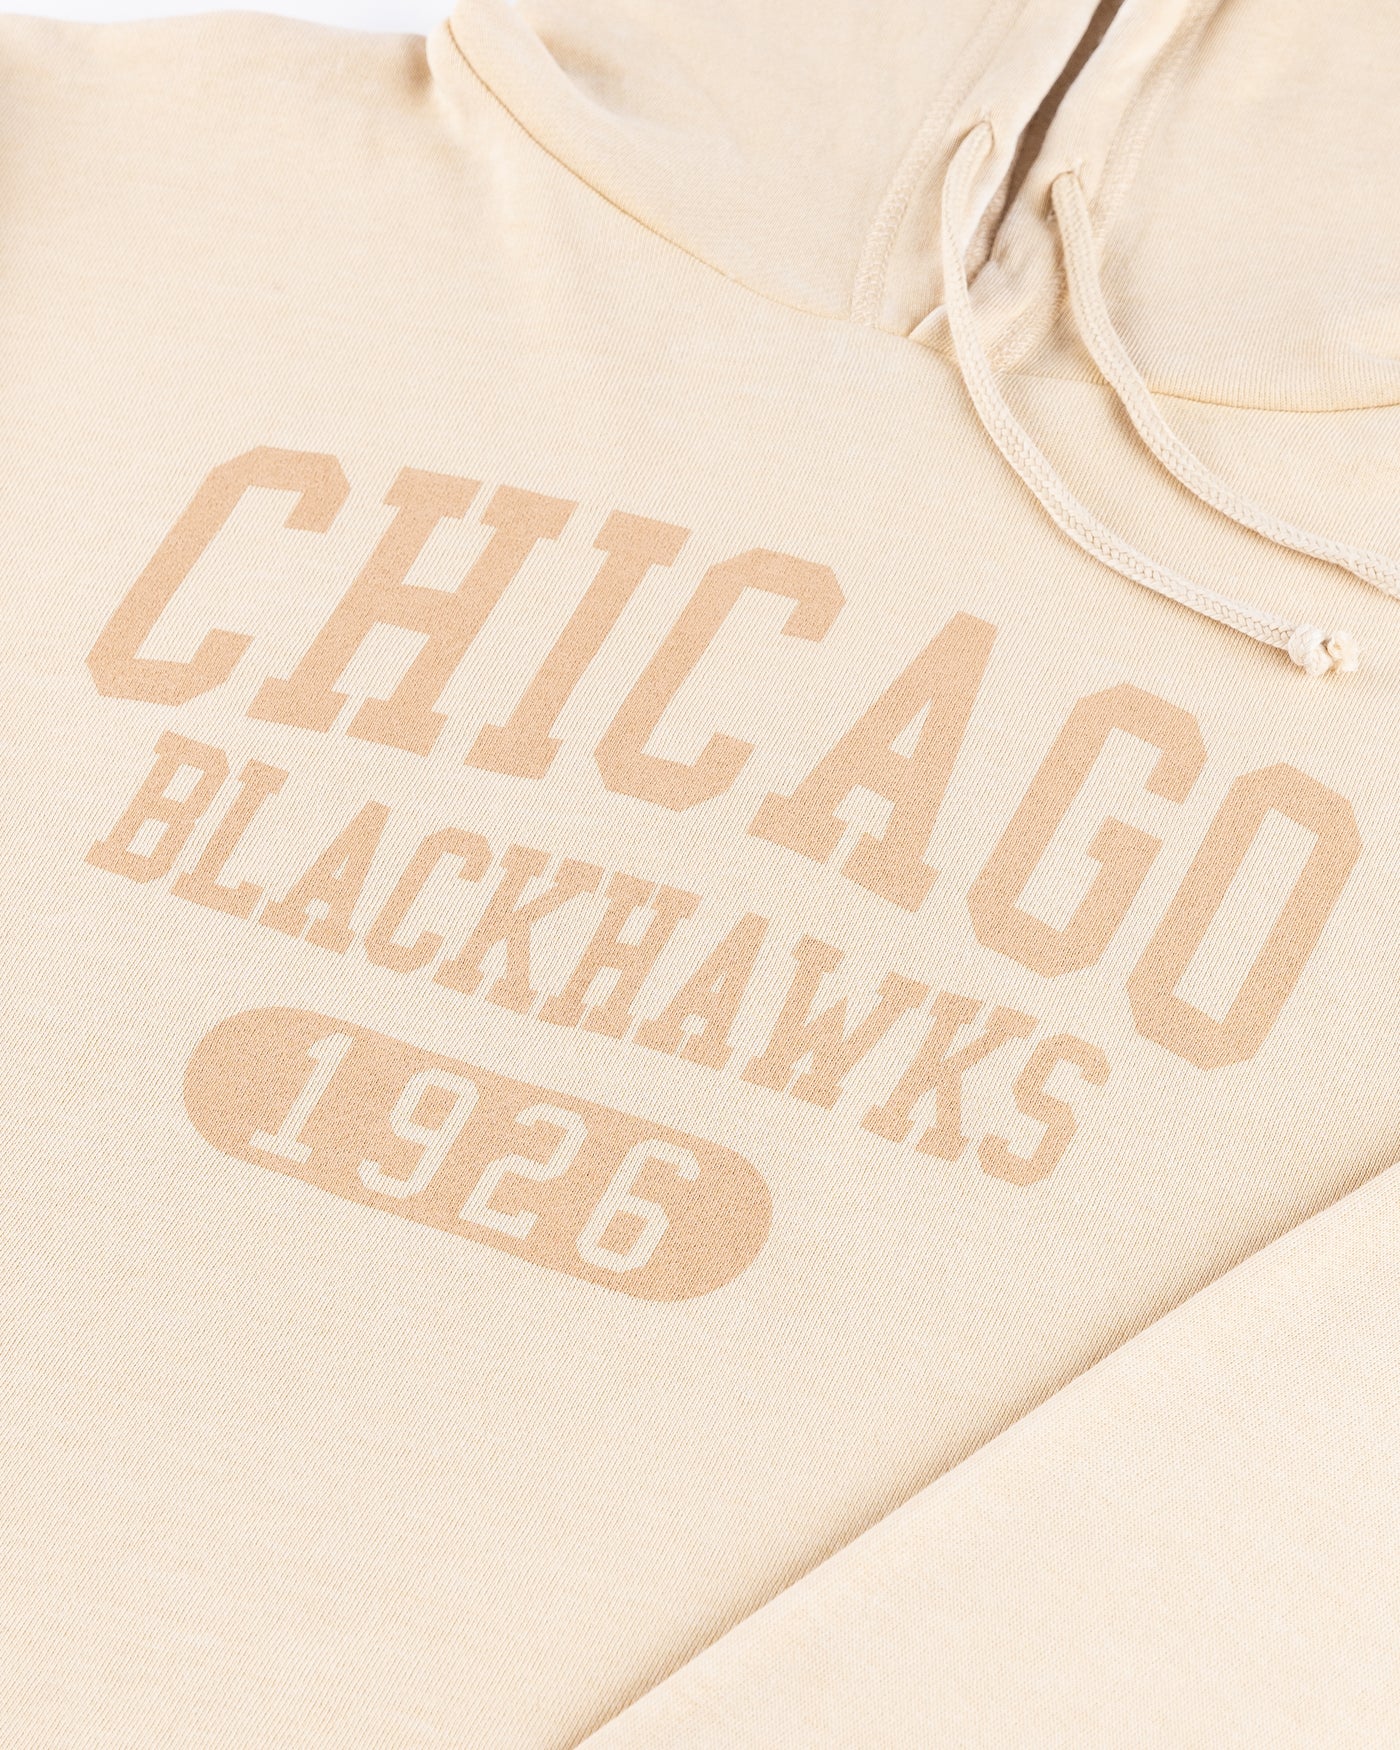 oatmeal chicka-d cropped hoodie with Chicago Blackhawks 1926 wordmark graphic across chest - detail lay flat